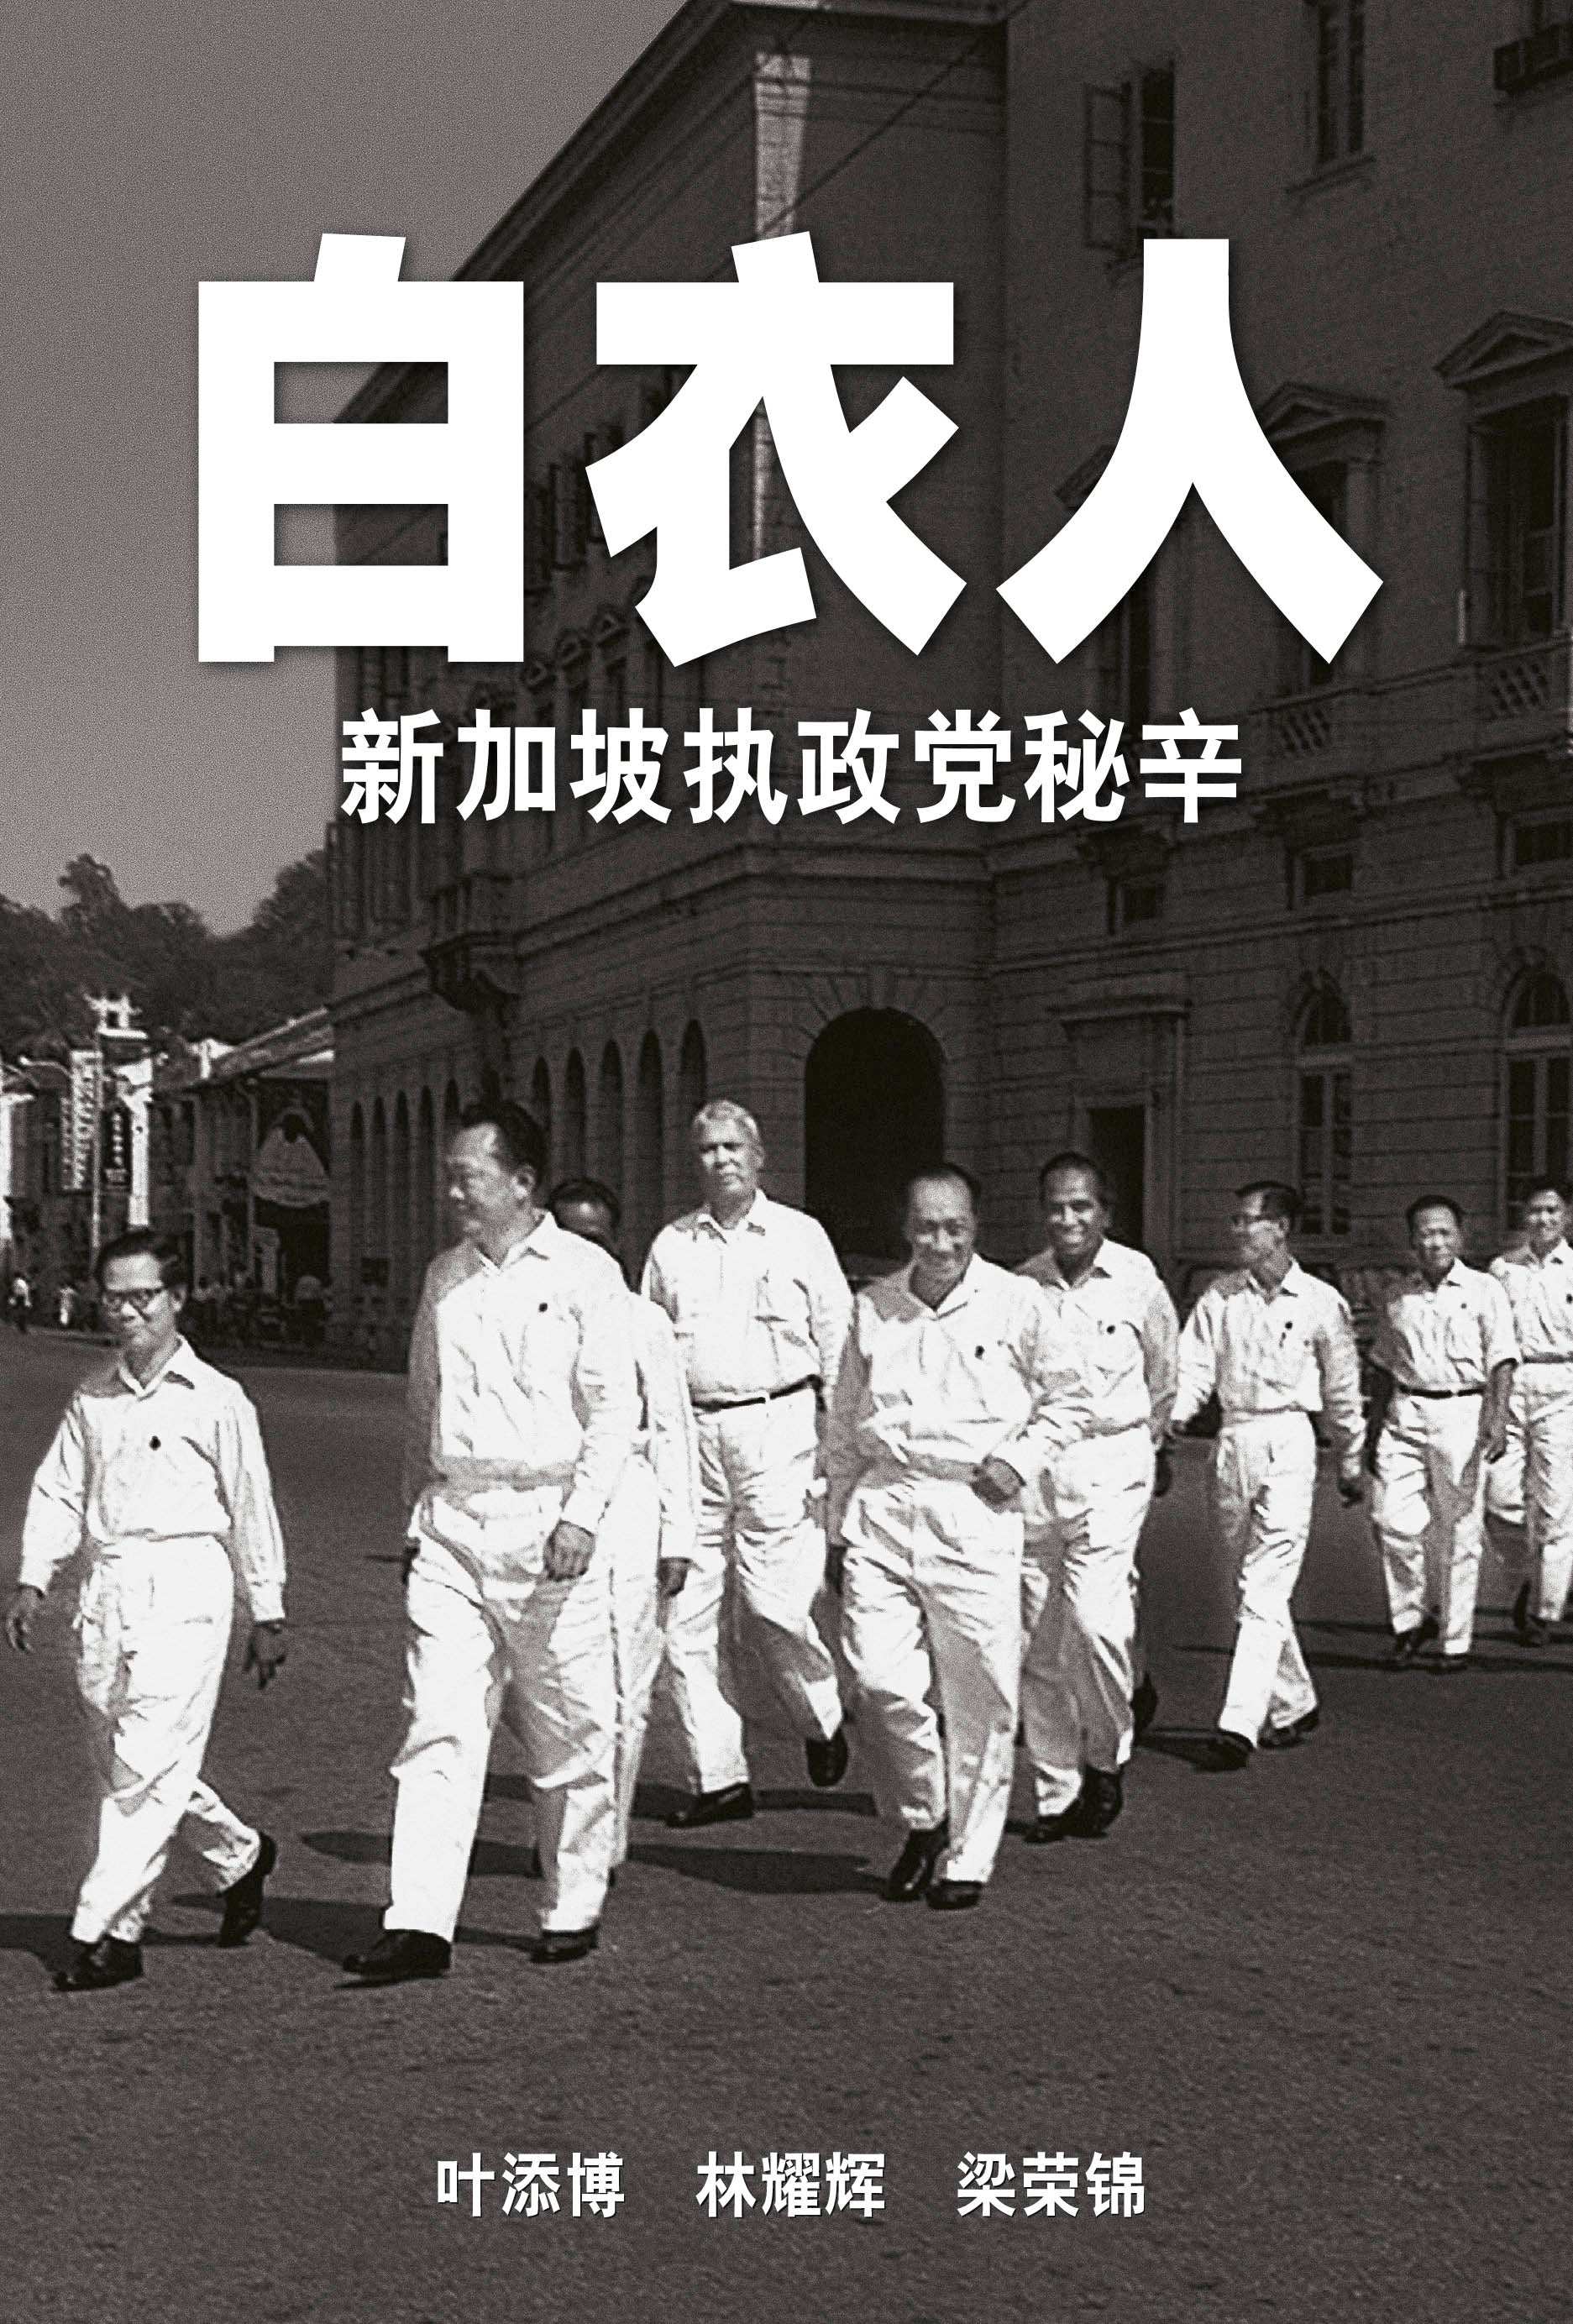 Men in White: The Untold Story of Singapore's Ruling Political Party